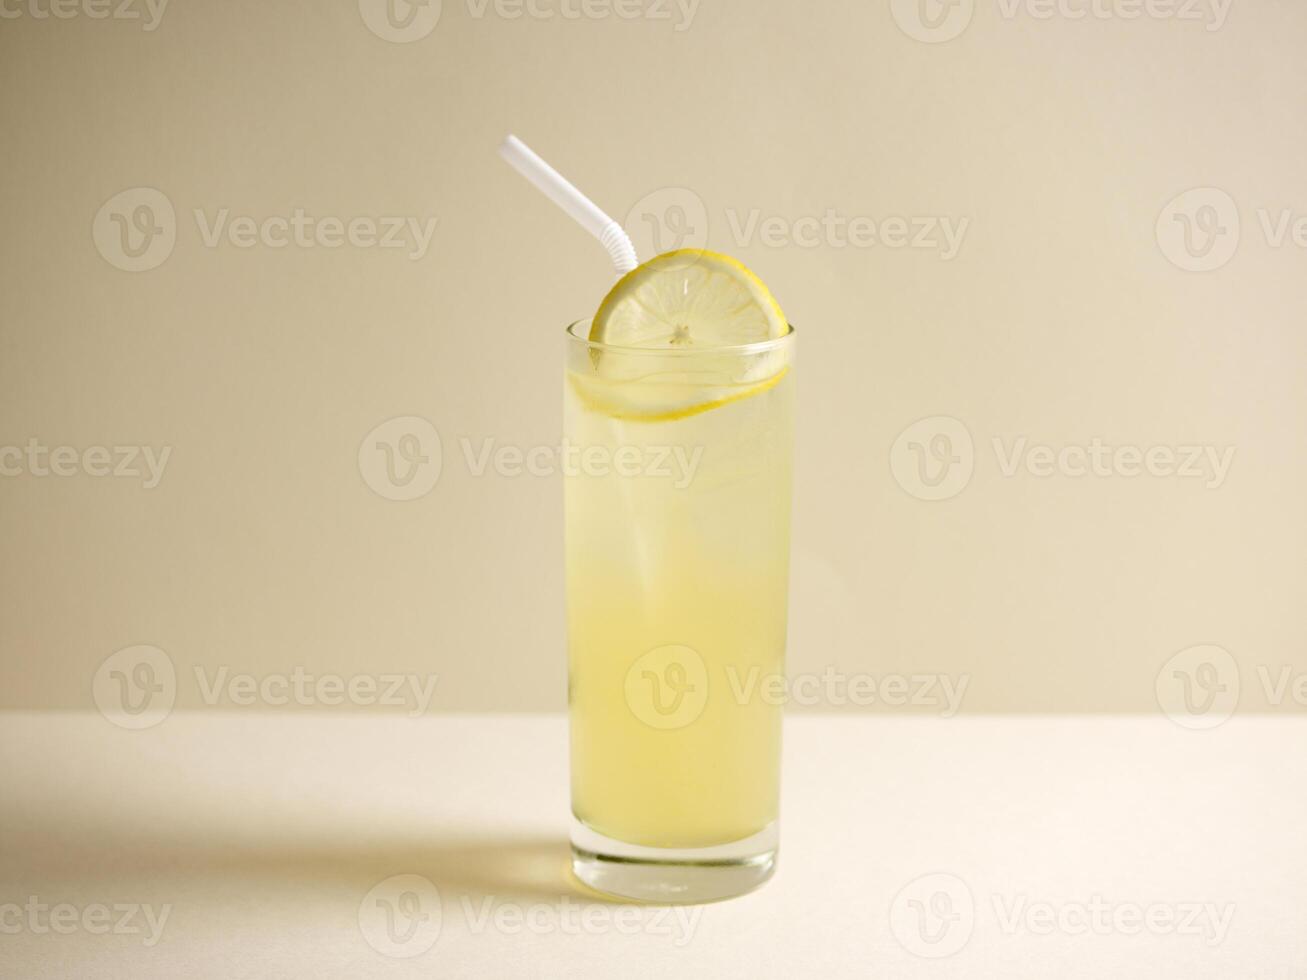 A glass of fresh iced honey lemon drink with straw isolated on grey background side view photo